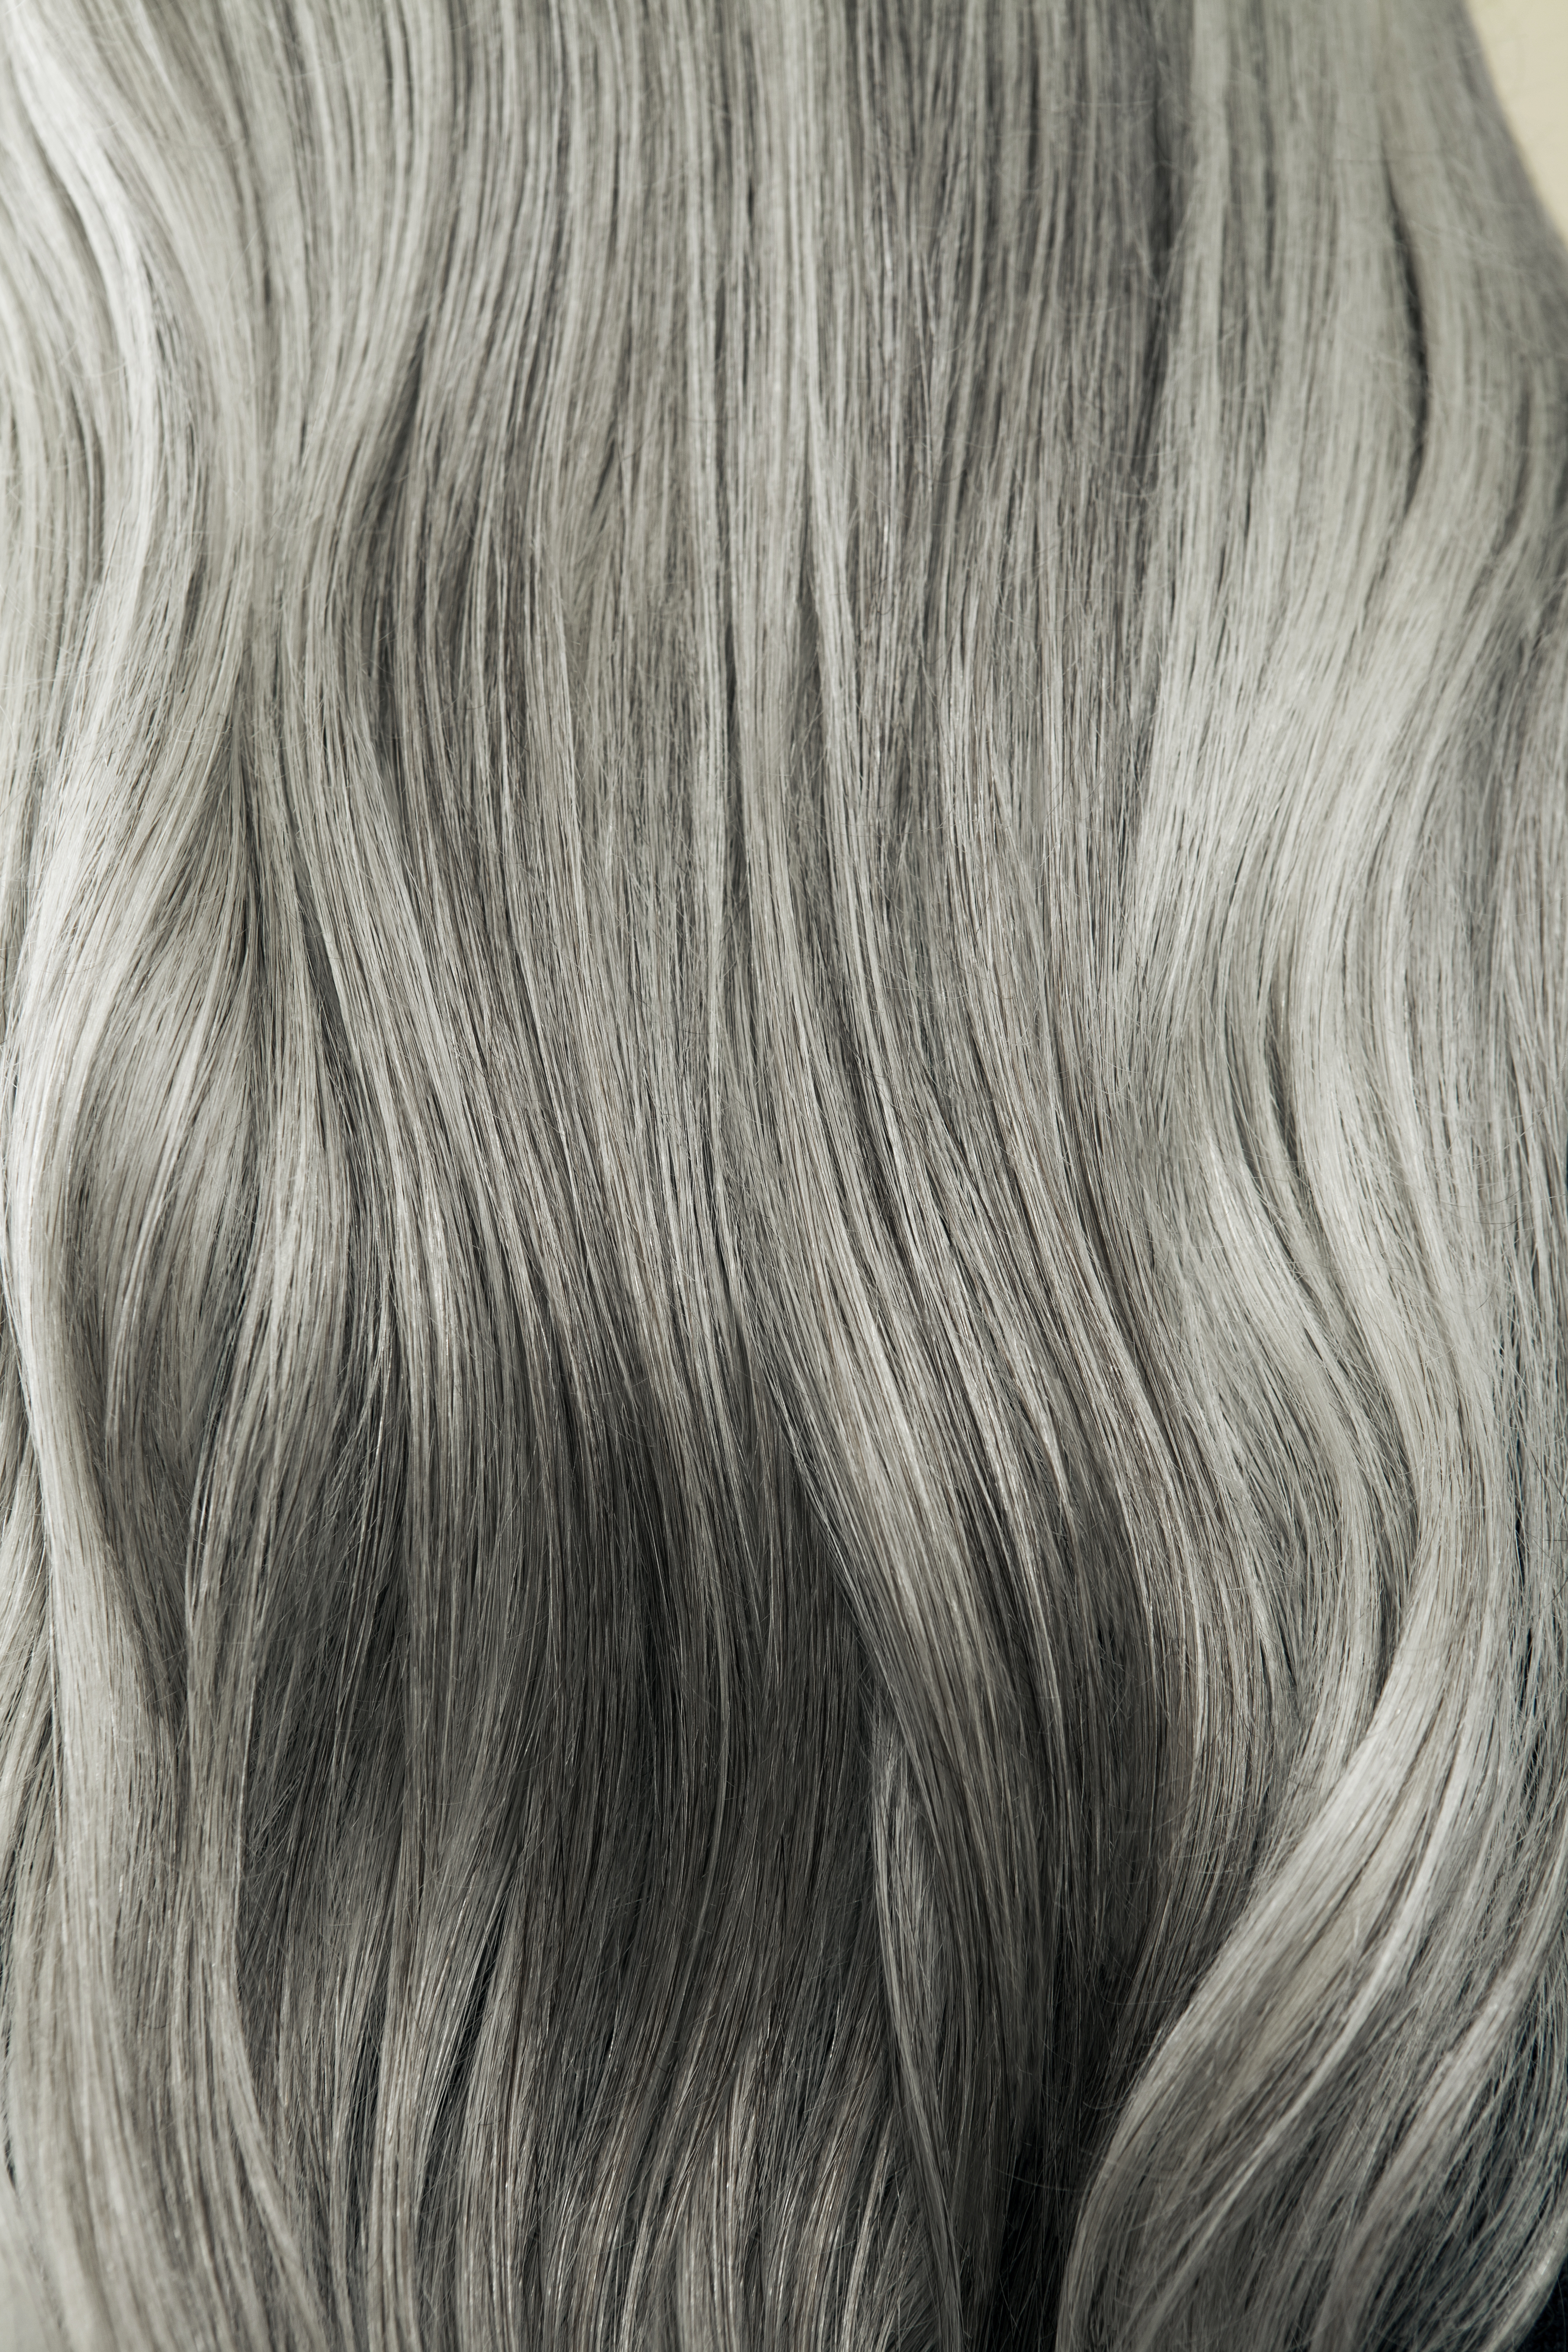 Hair Dye No More? Researchers Find Gene for Grey Hair | Time